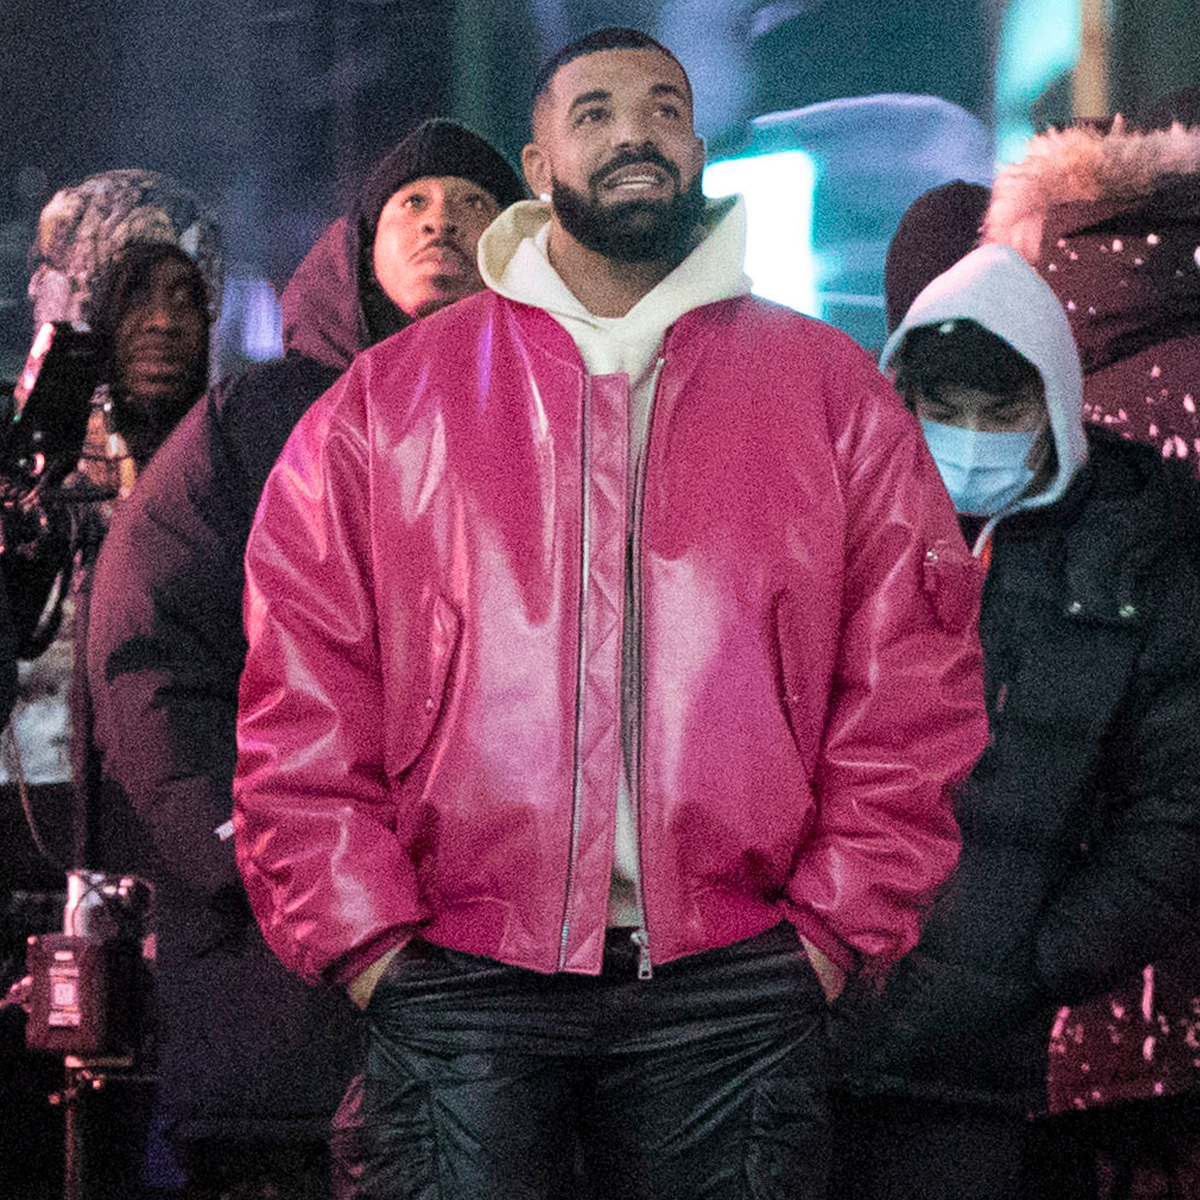 Drake Wore a Pink Soccer Jersey and Pink Sunglasses While Drinking